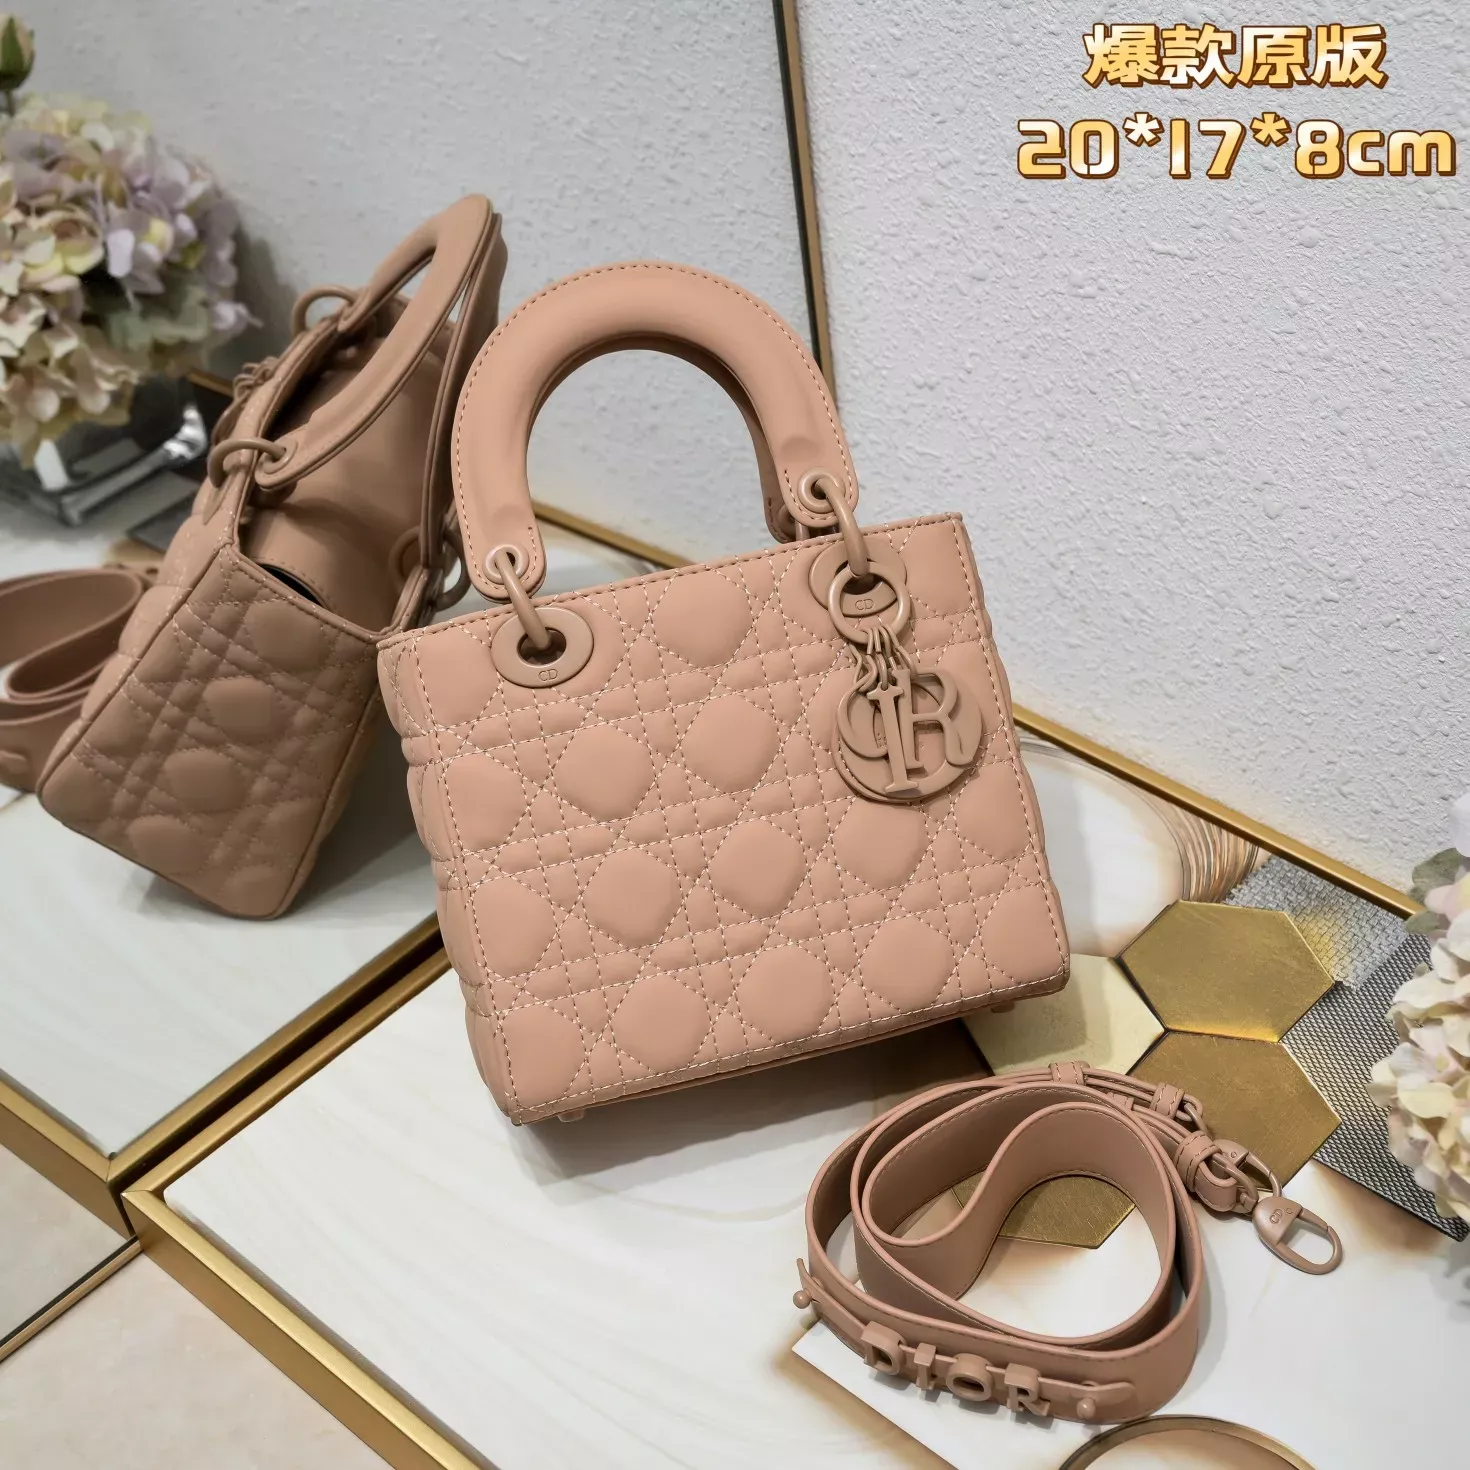 Chanel Purse Dupe - Dillards Purse Review 🤍, Gallery posted by sara 🎀